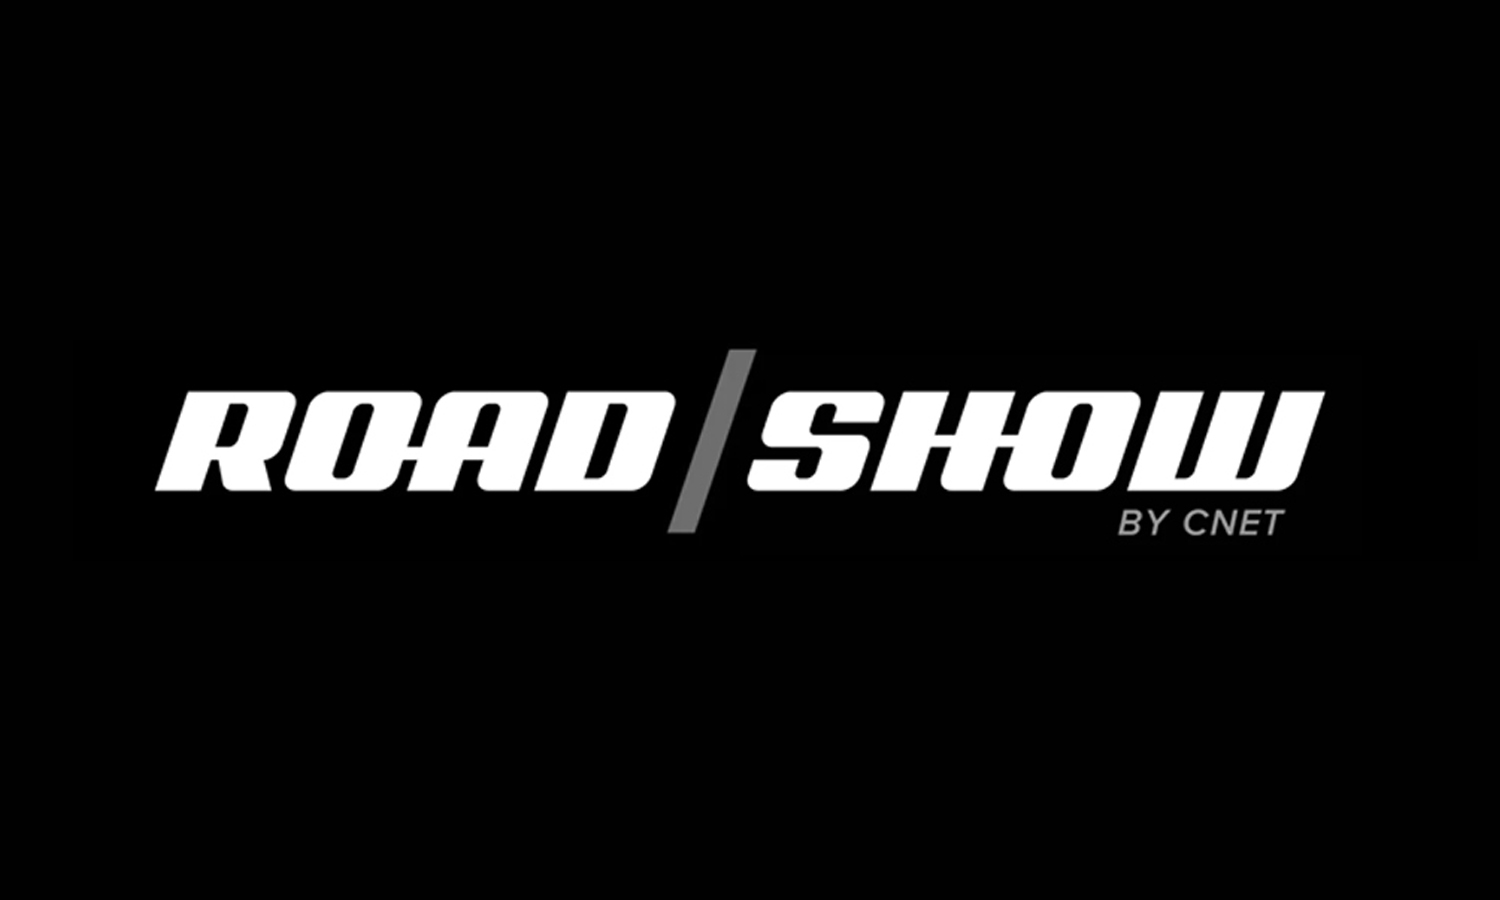 The Roadshow logo in black and white